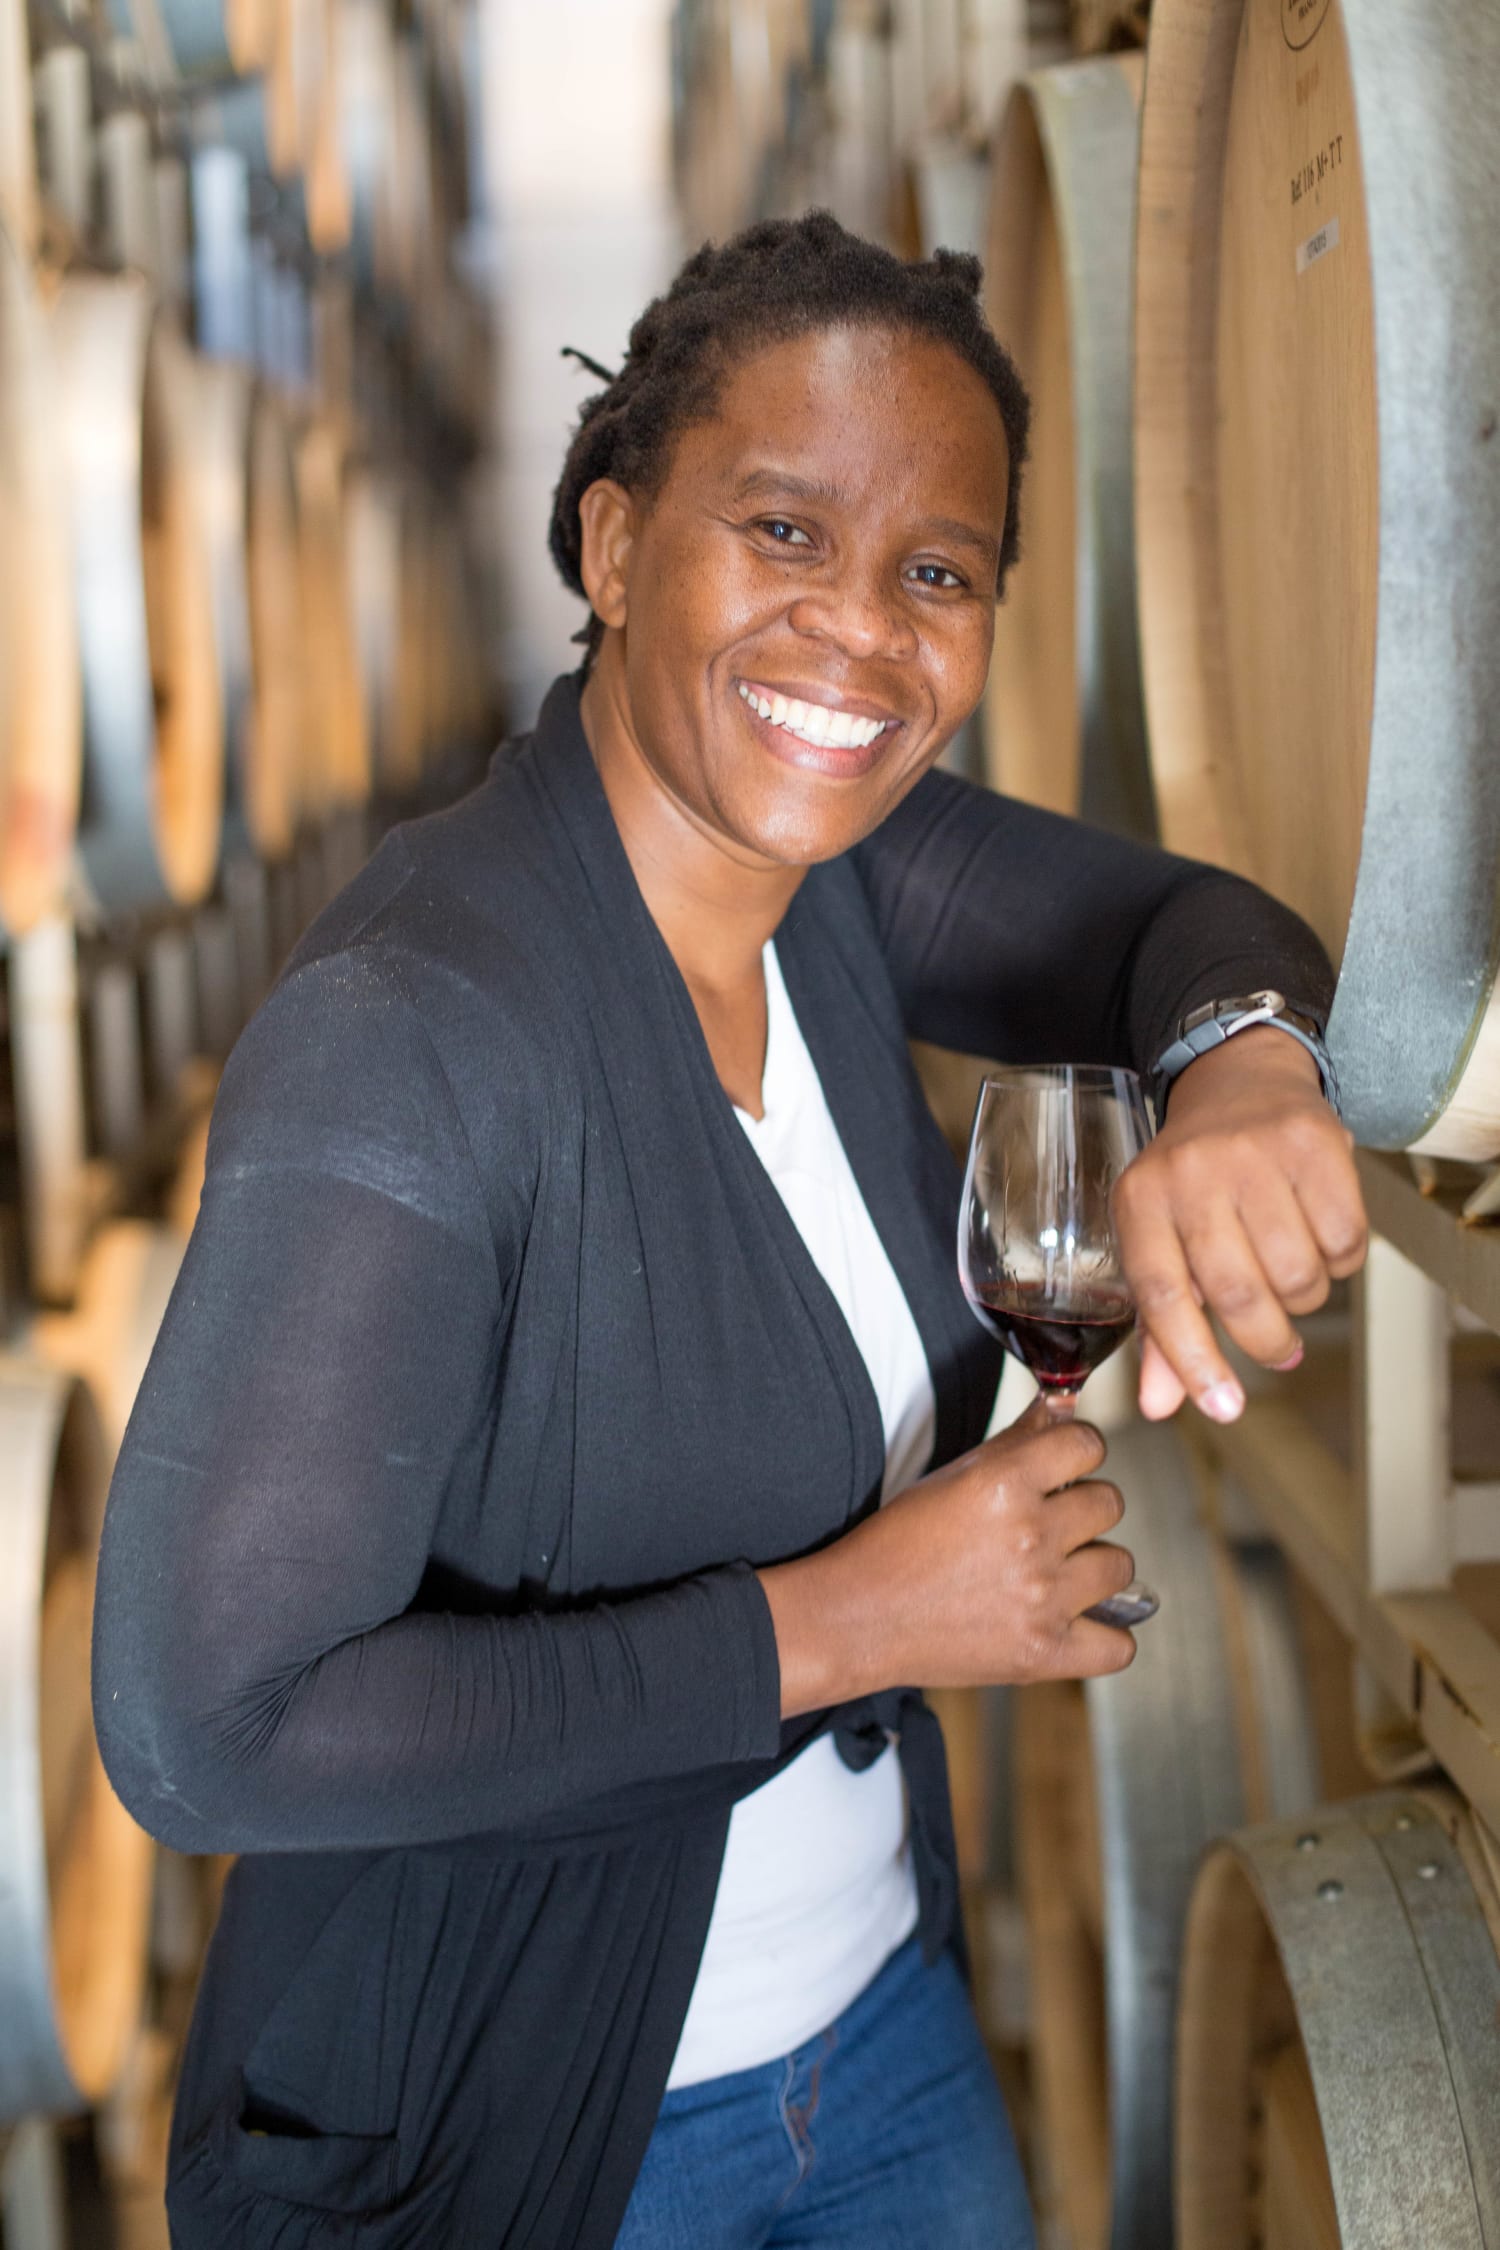 South Africa's First Black Female Winemaker Launches Her Own Brand